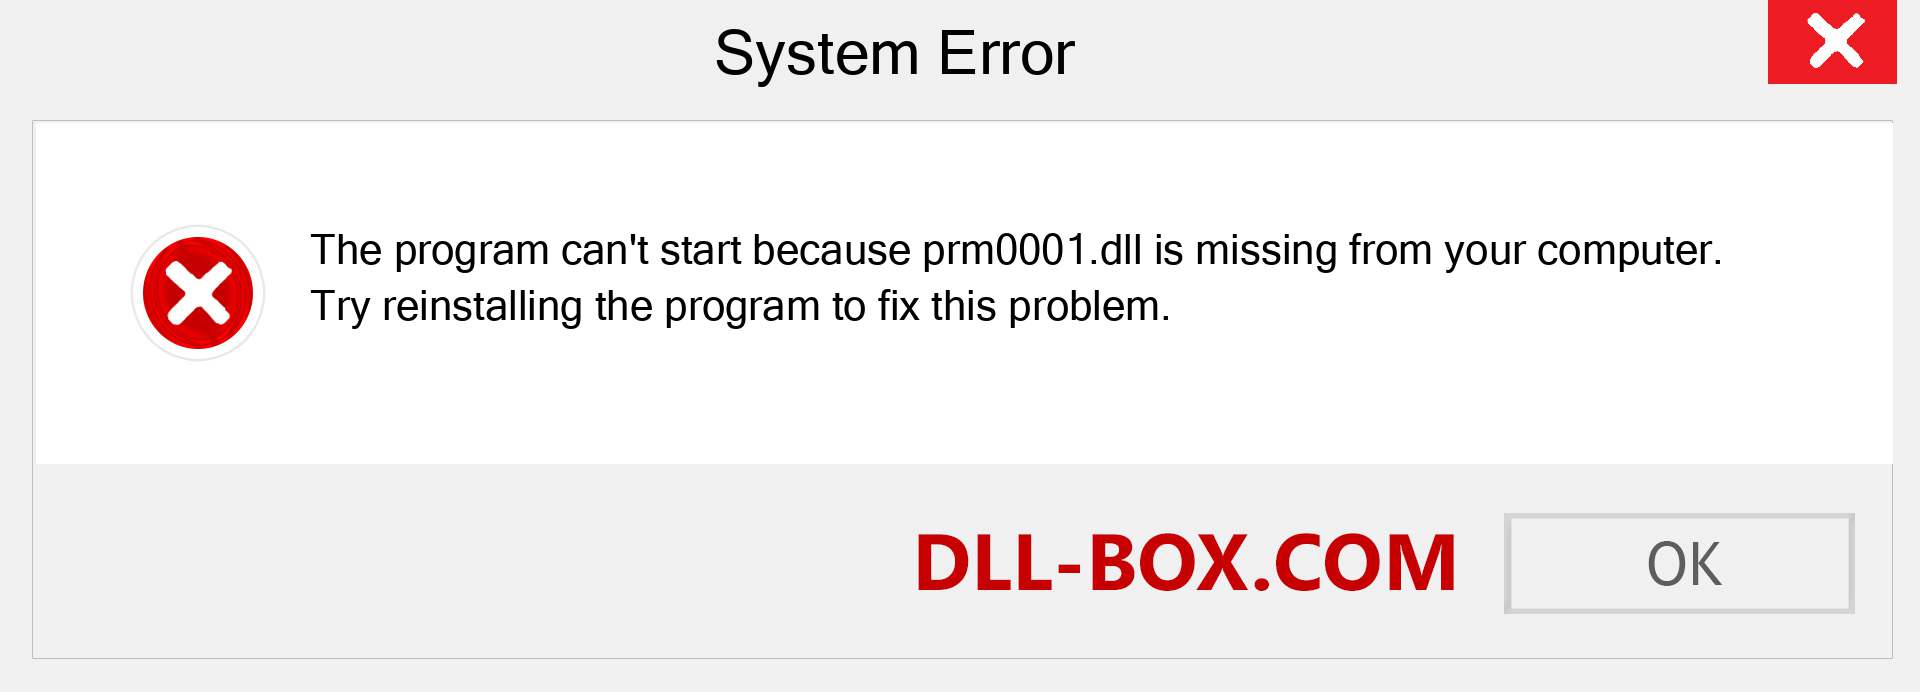  prm0001.dll file is missing?. Download for Windows 7, 8, 10 - Fix  prm0001 dll Missing Error on Windows, photos, images